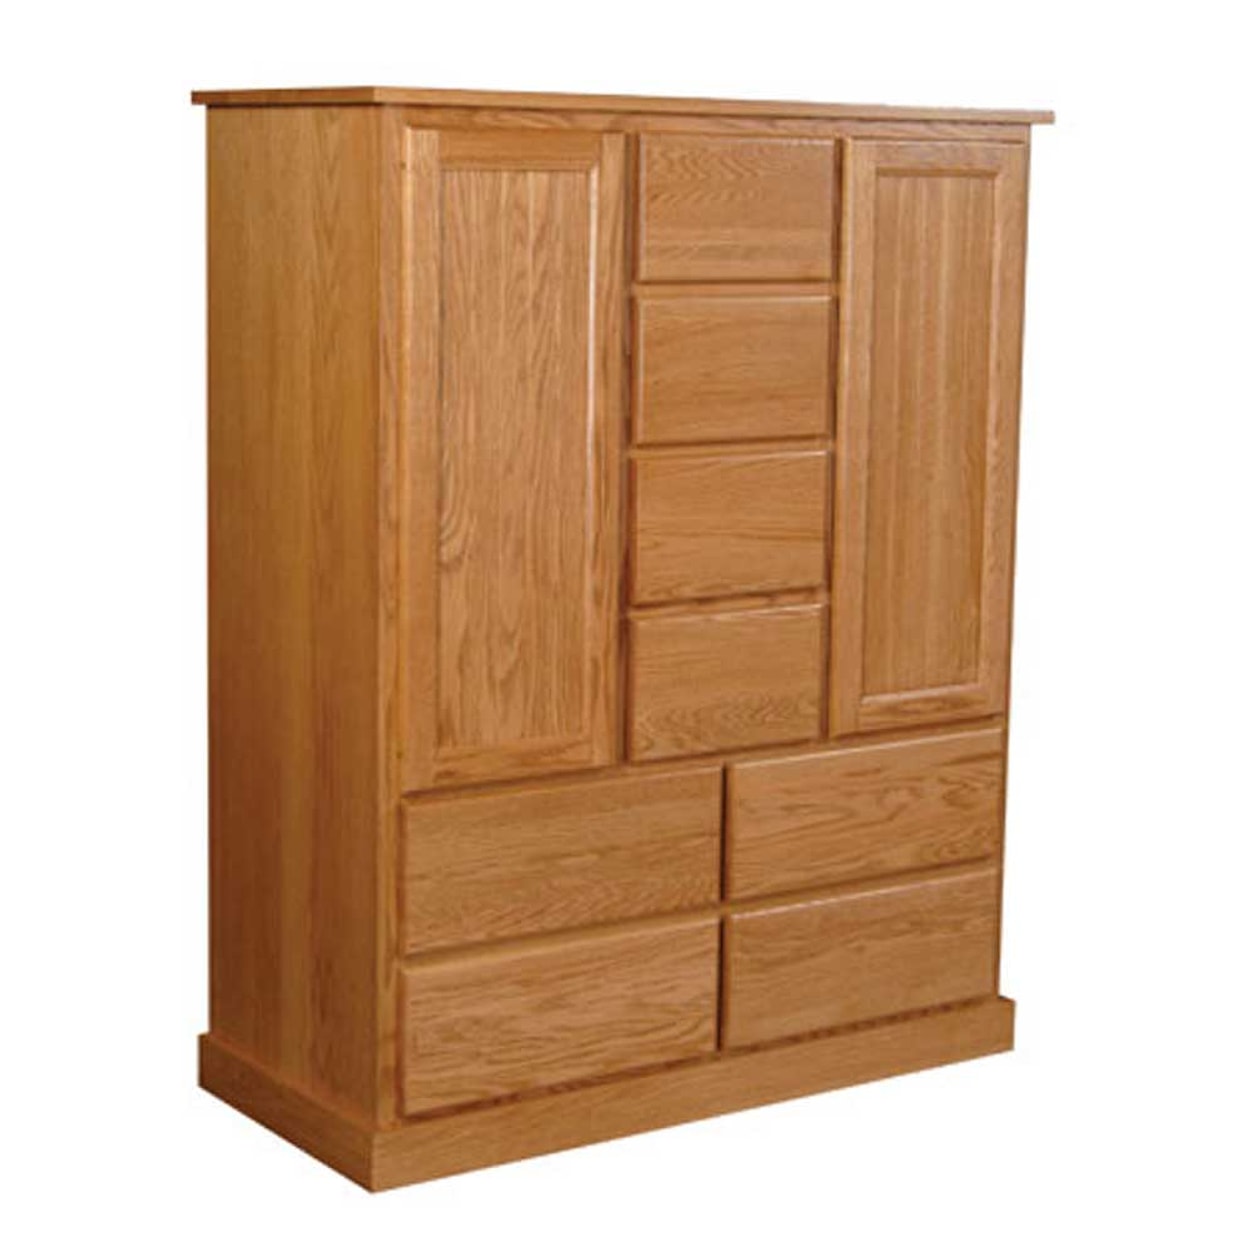 Simply Amish Mission Amish Door Chest